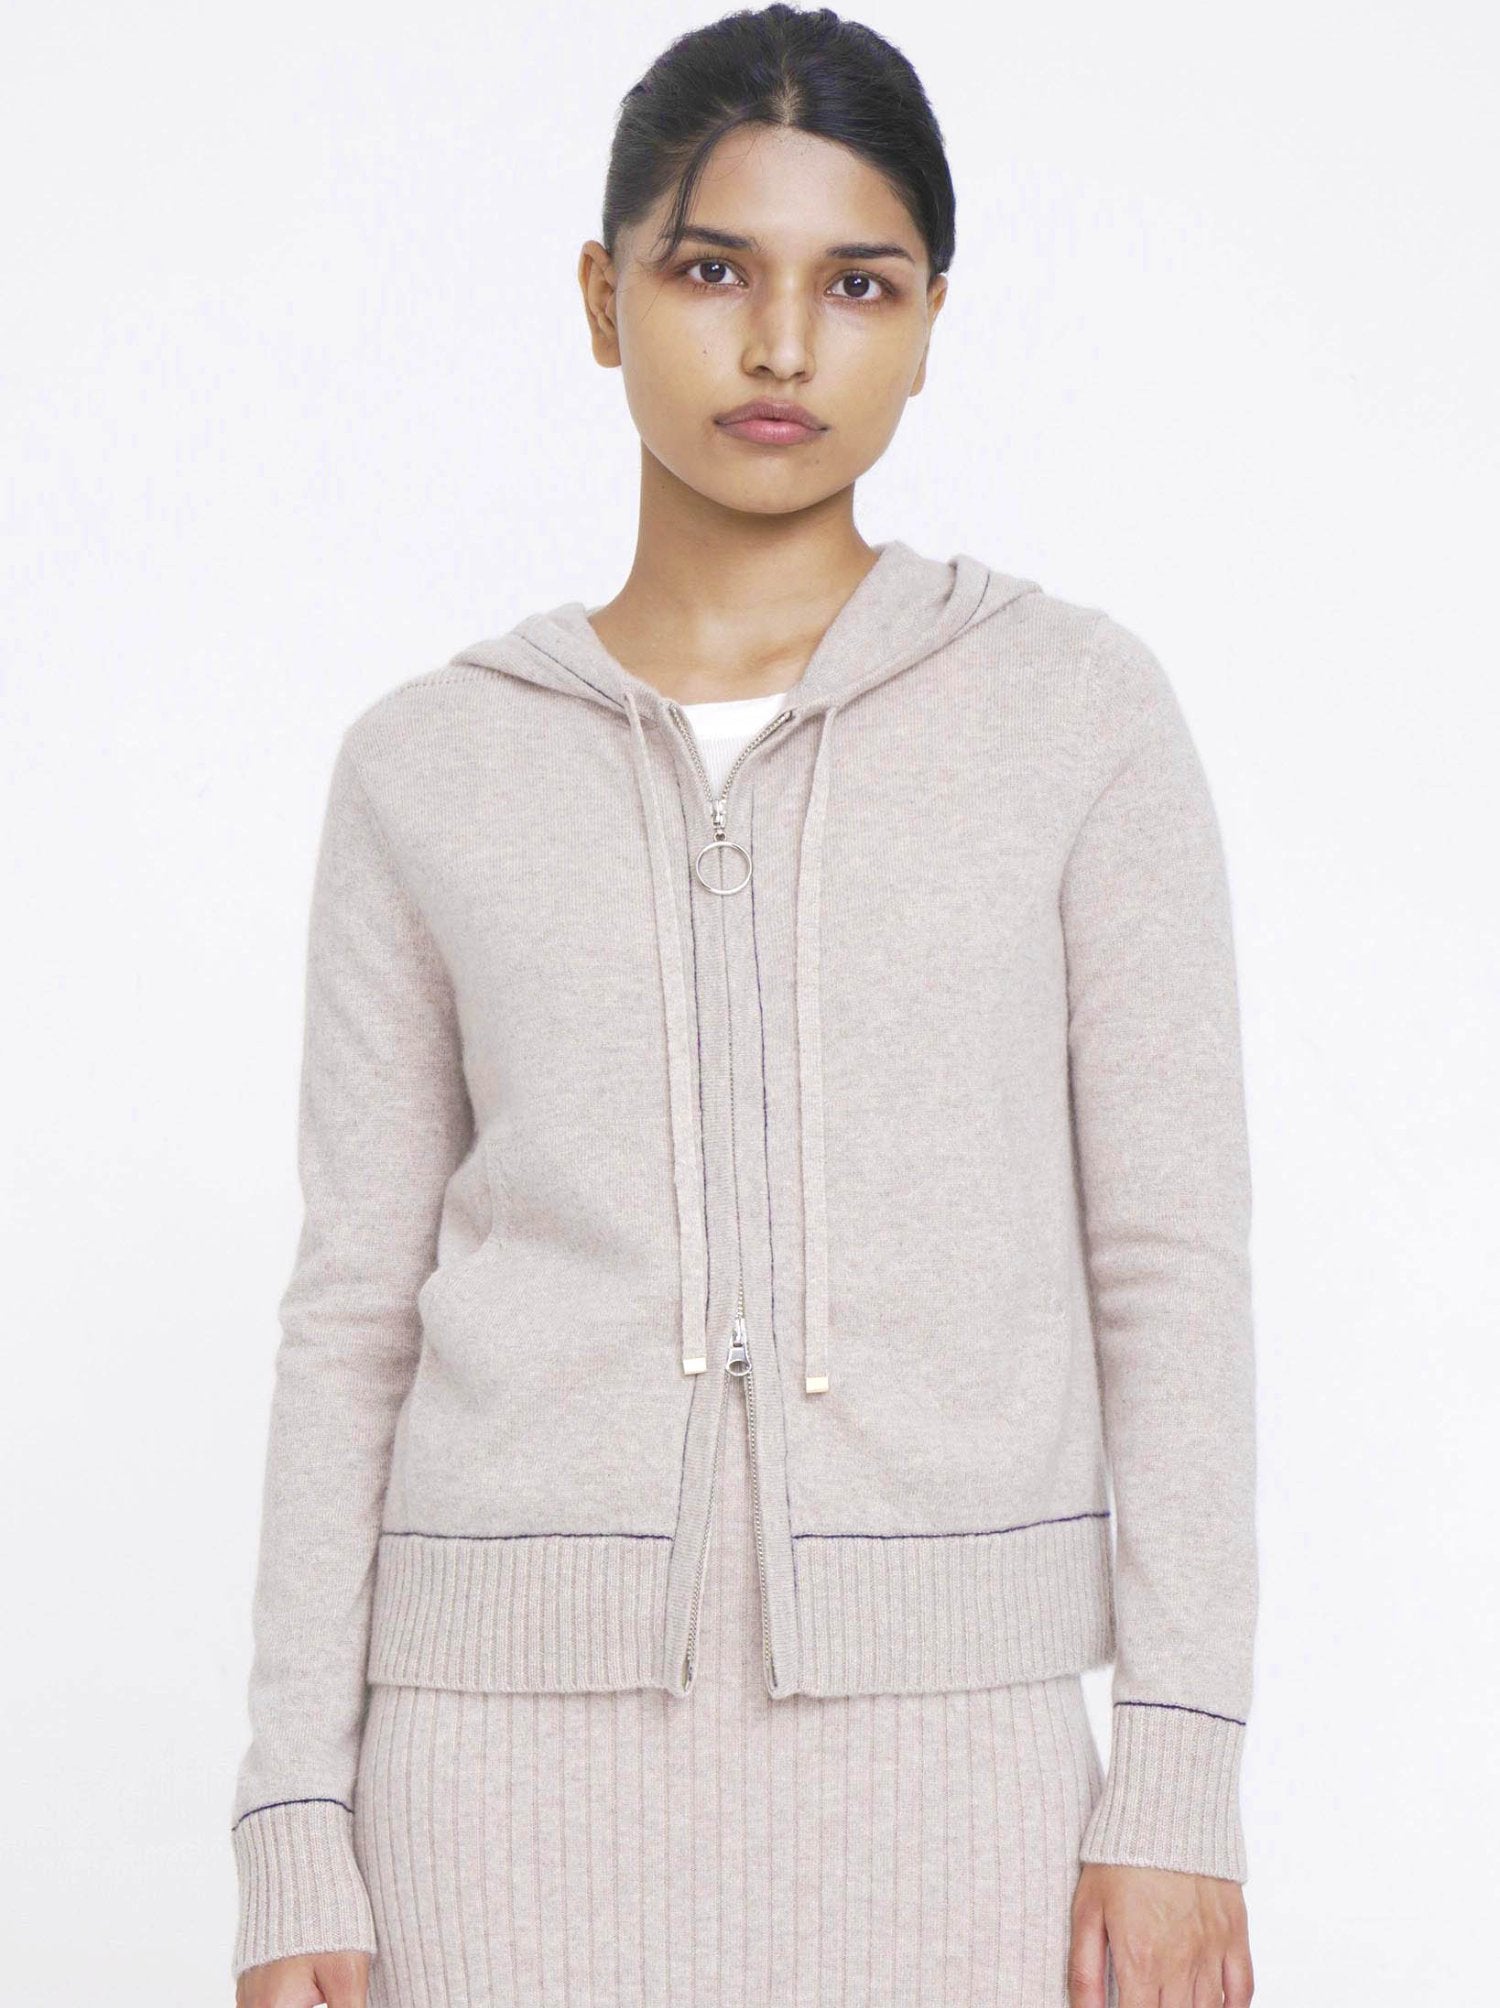 N.55 100% CASHMERE  OVERSIZED ZIP HOODY - CHAMPAGNE- Only S Left